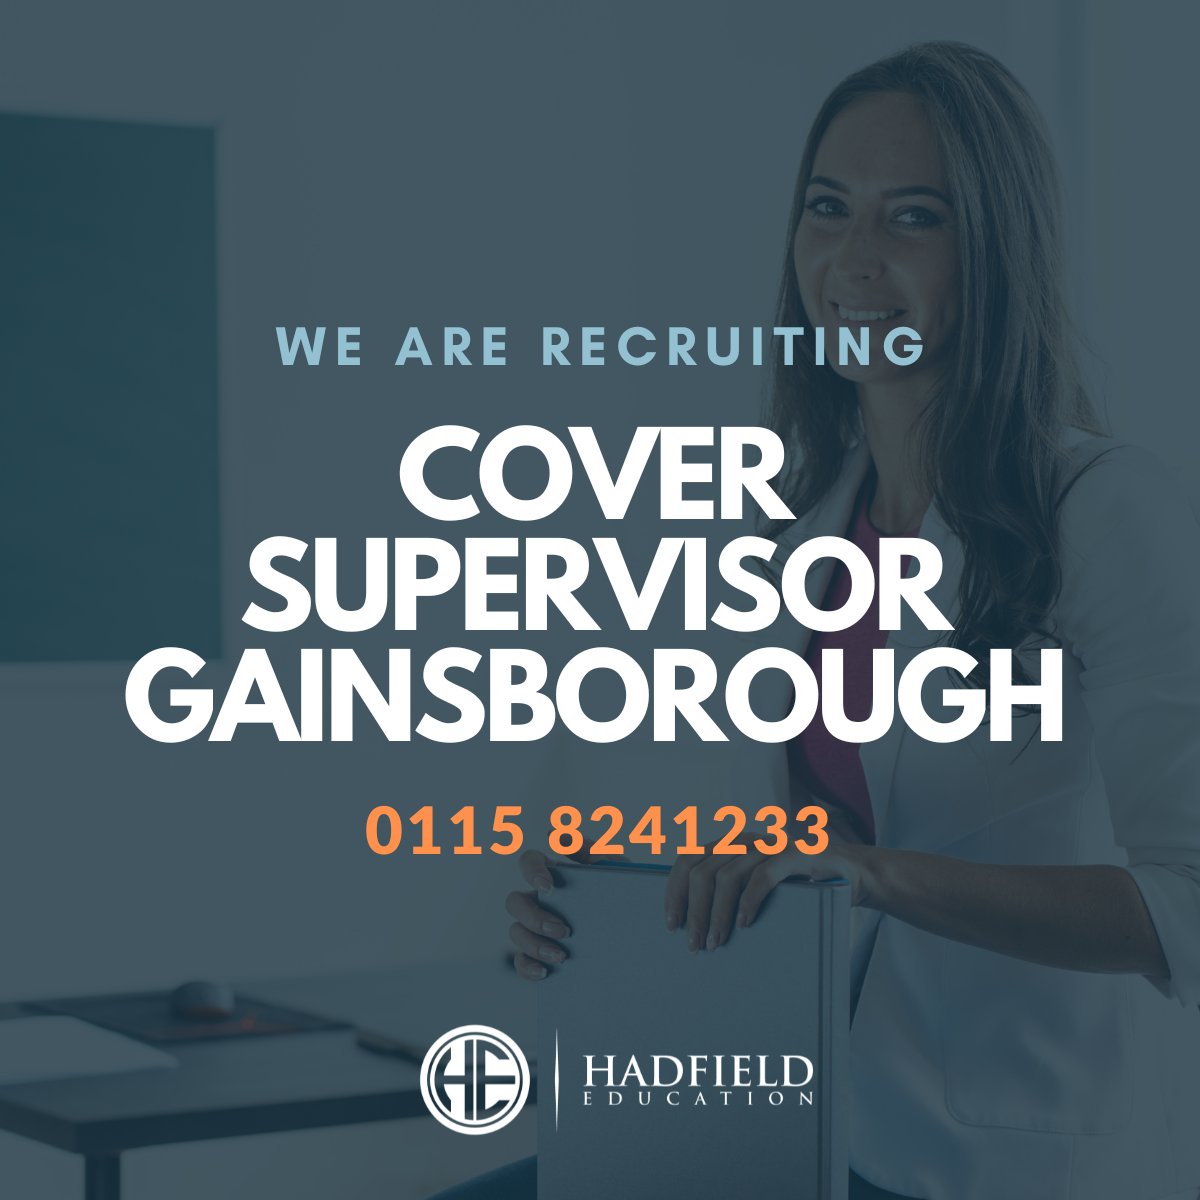 If you are a Cover Supervisor looking for daily or termly work this is for you..

bit.ly/3OS5WYX

#CoverSupervisor
#TeachingAssistant
#HLTA
#TA
#CoverSup
#LearningSupportAssistant
#GainsboroughCoverSupervisor